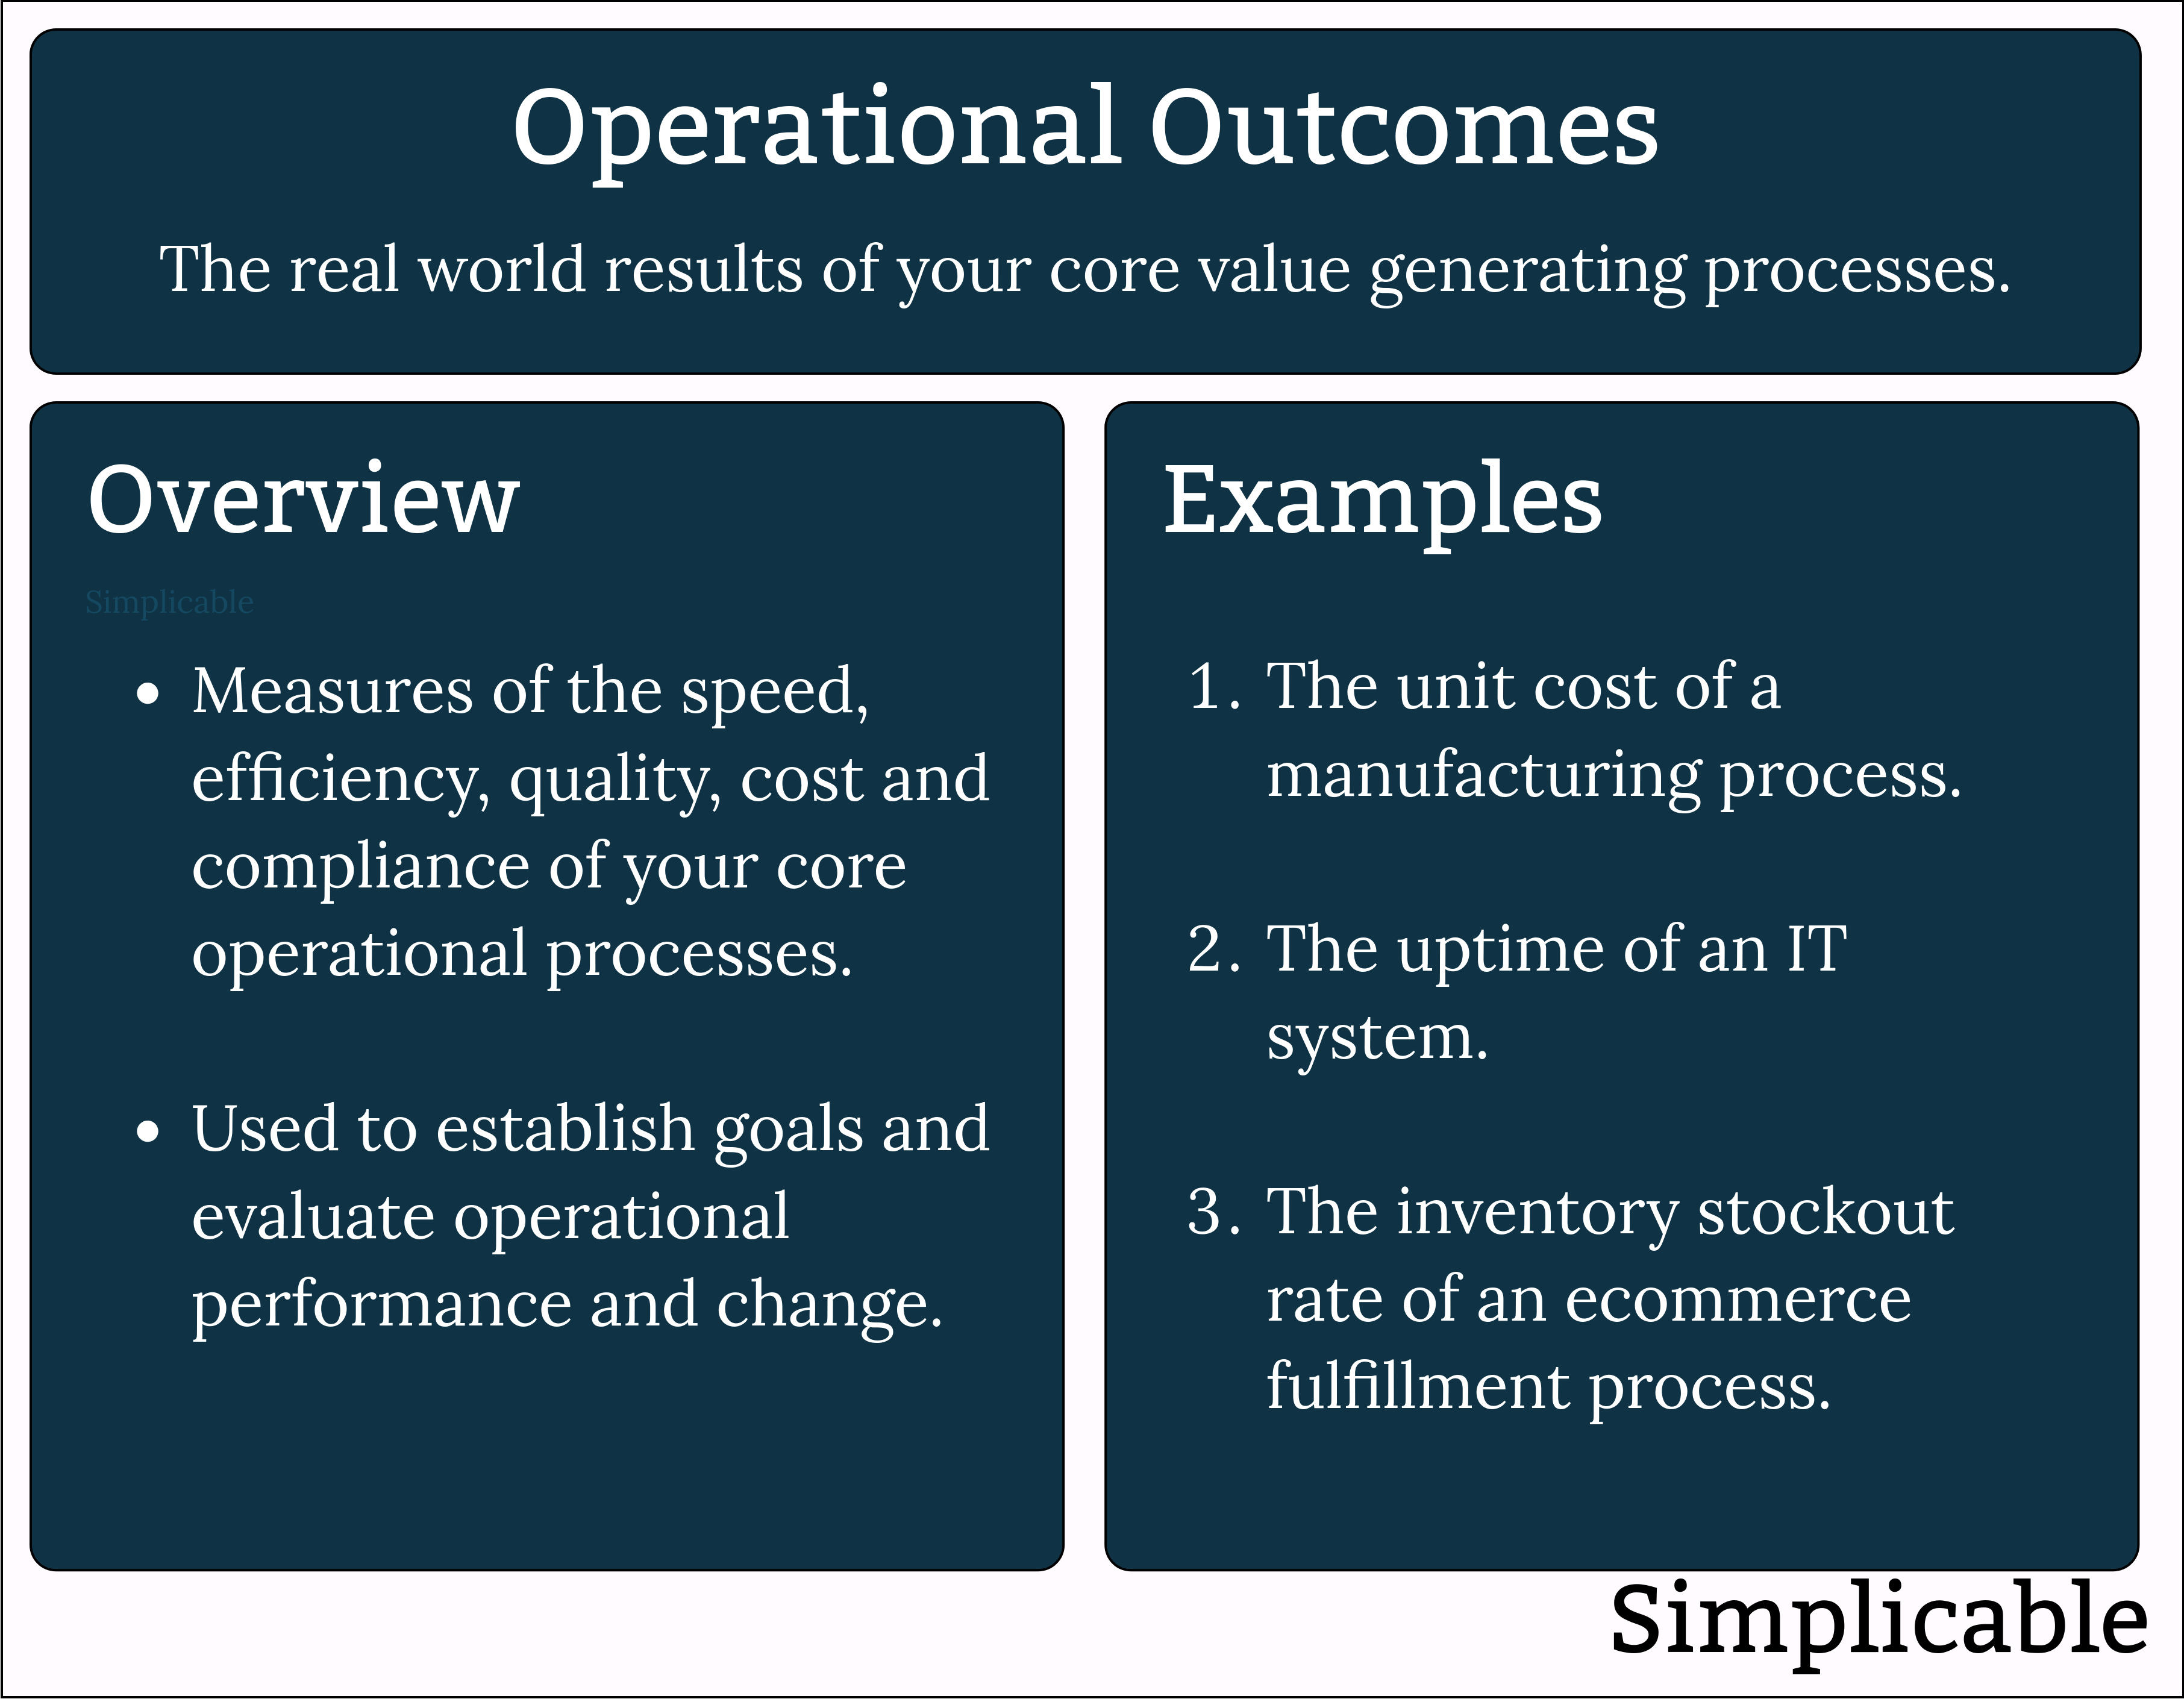 operational outcomes overview and examples